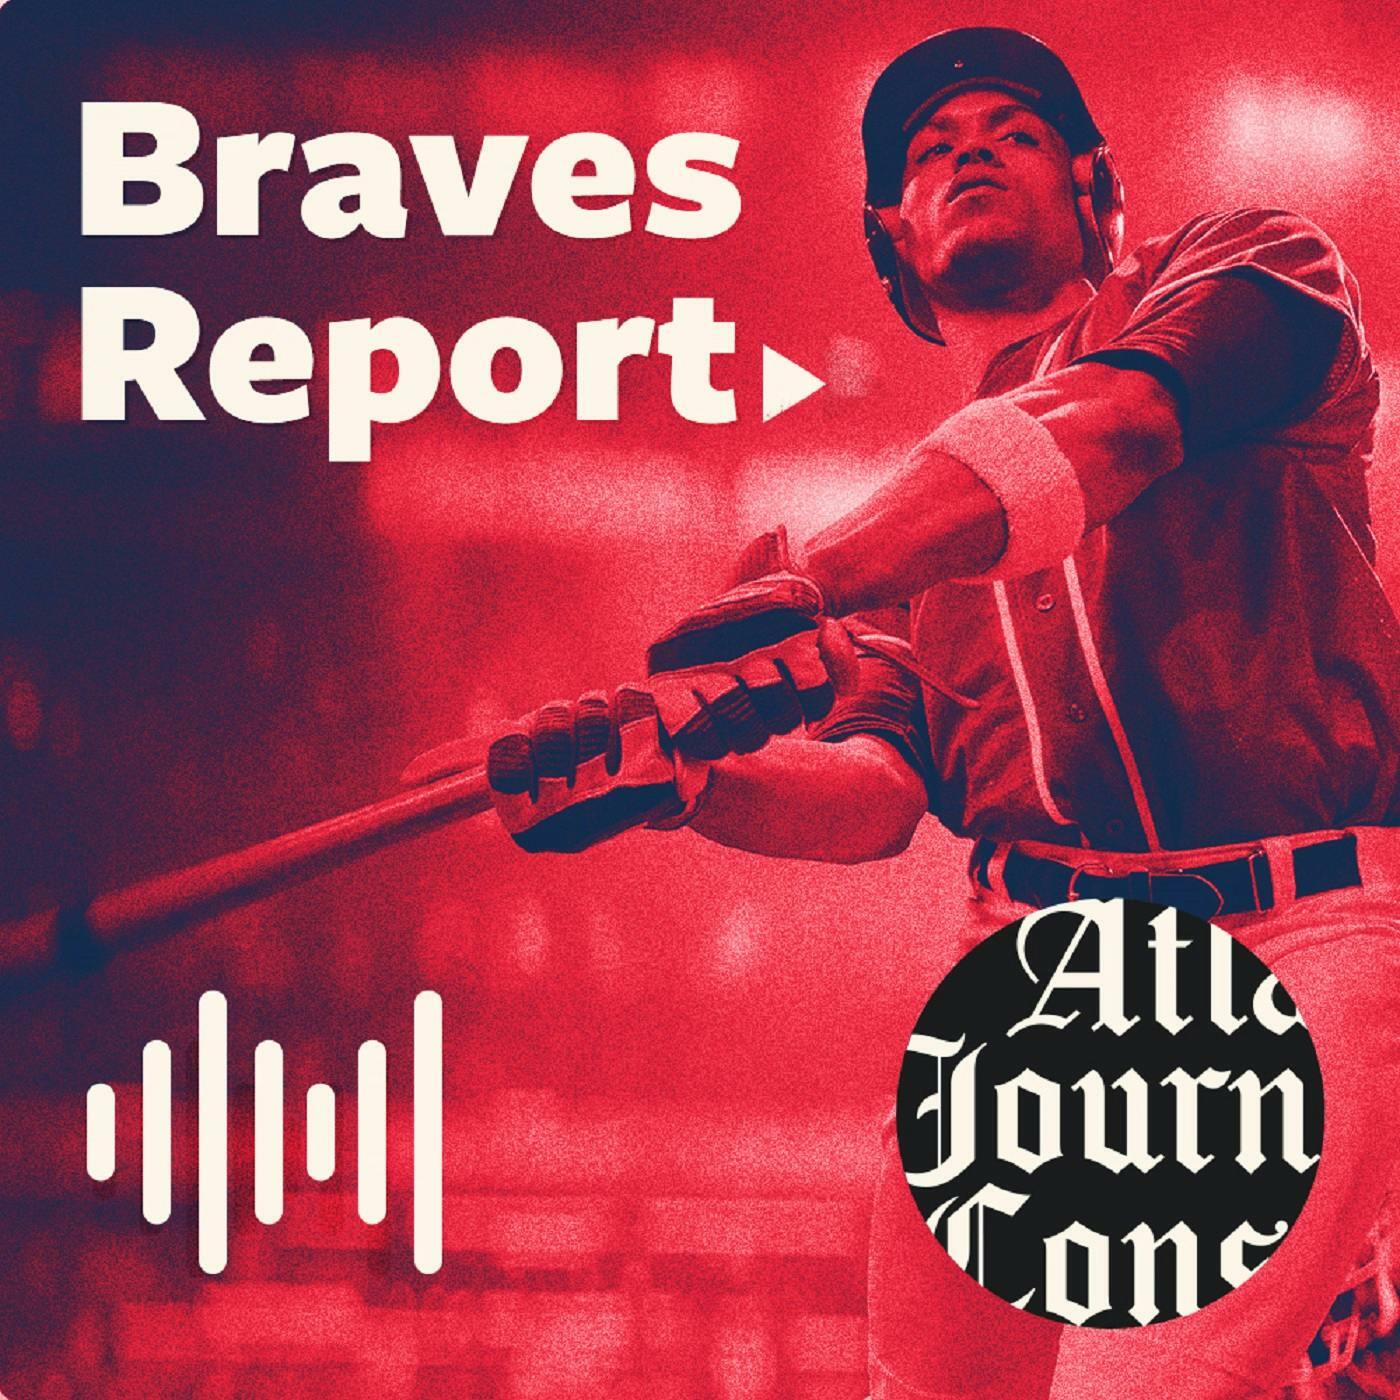 Front page news: See the AJC headline for NL East Champion Atlanta